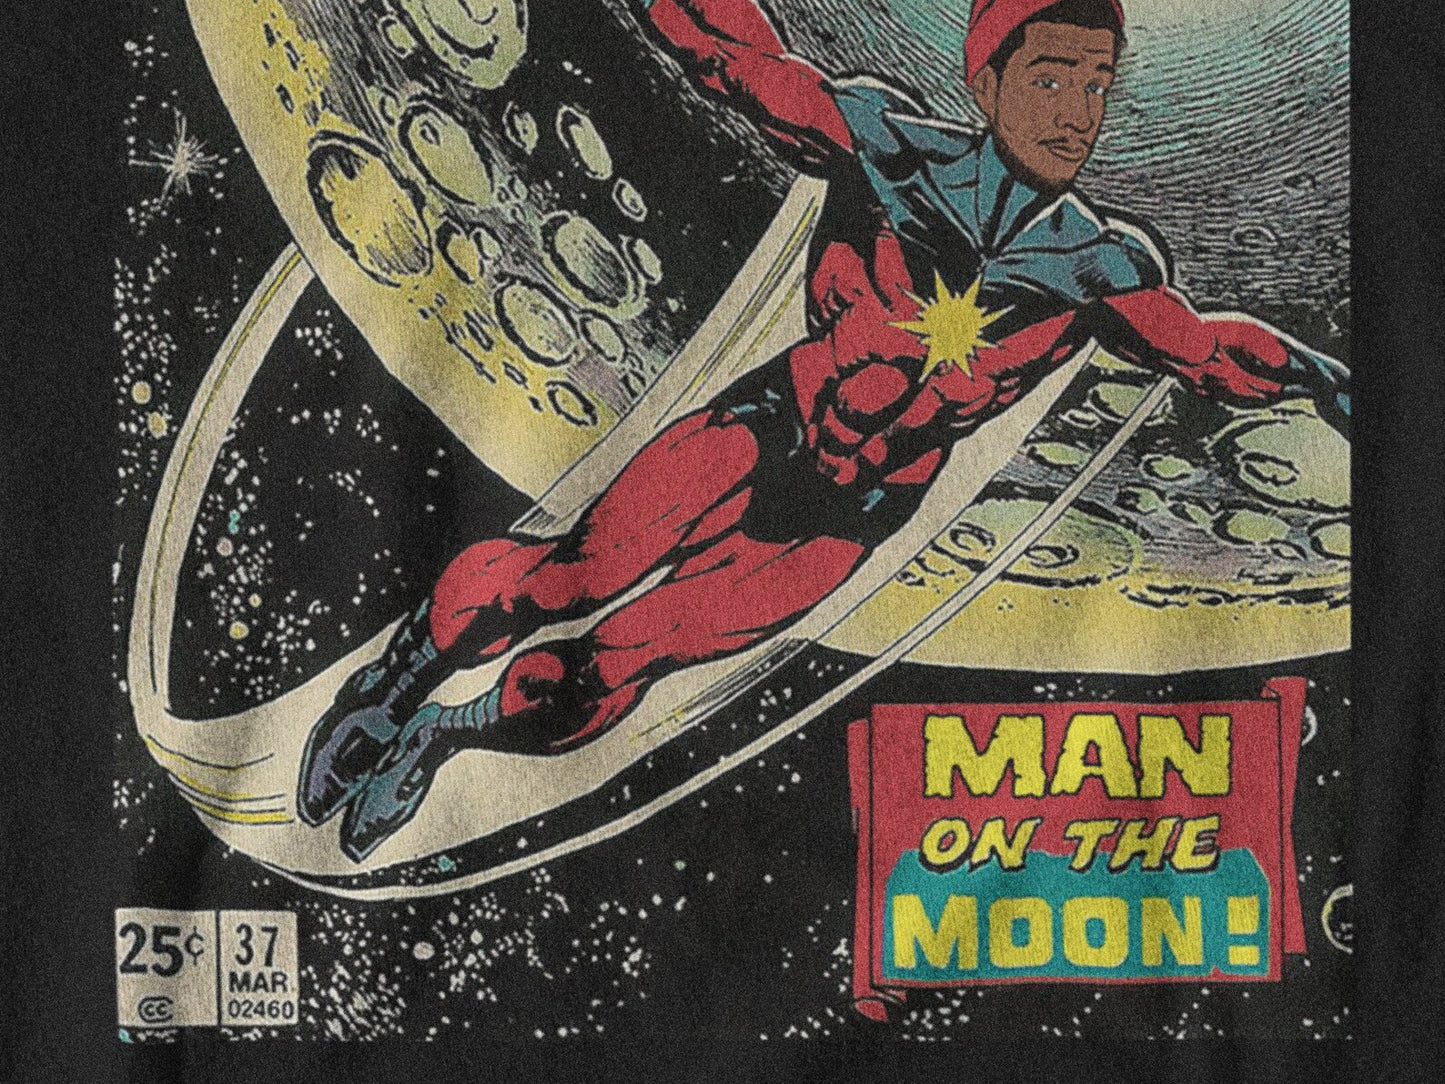 Man On The Moon Comic Book Cover Style Tee